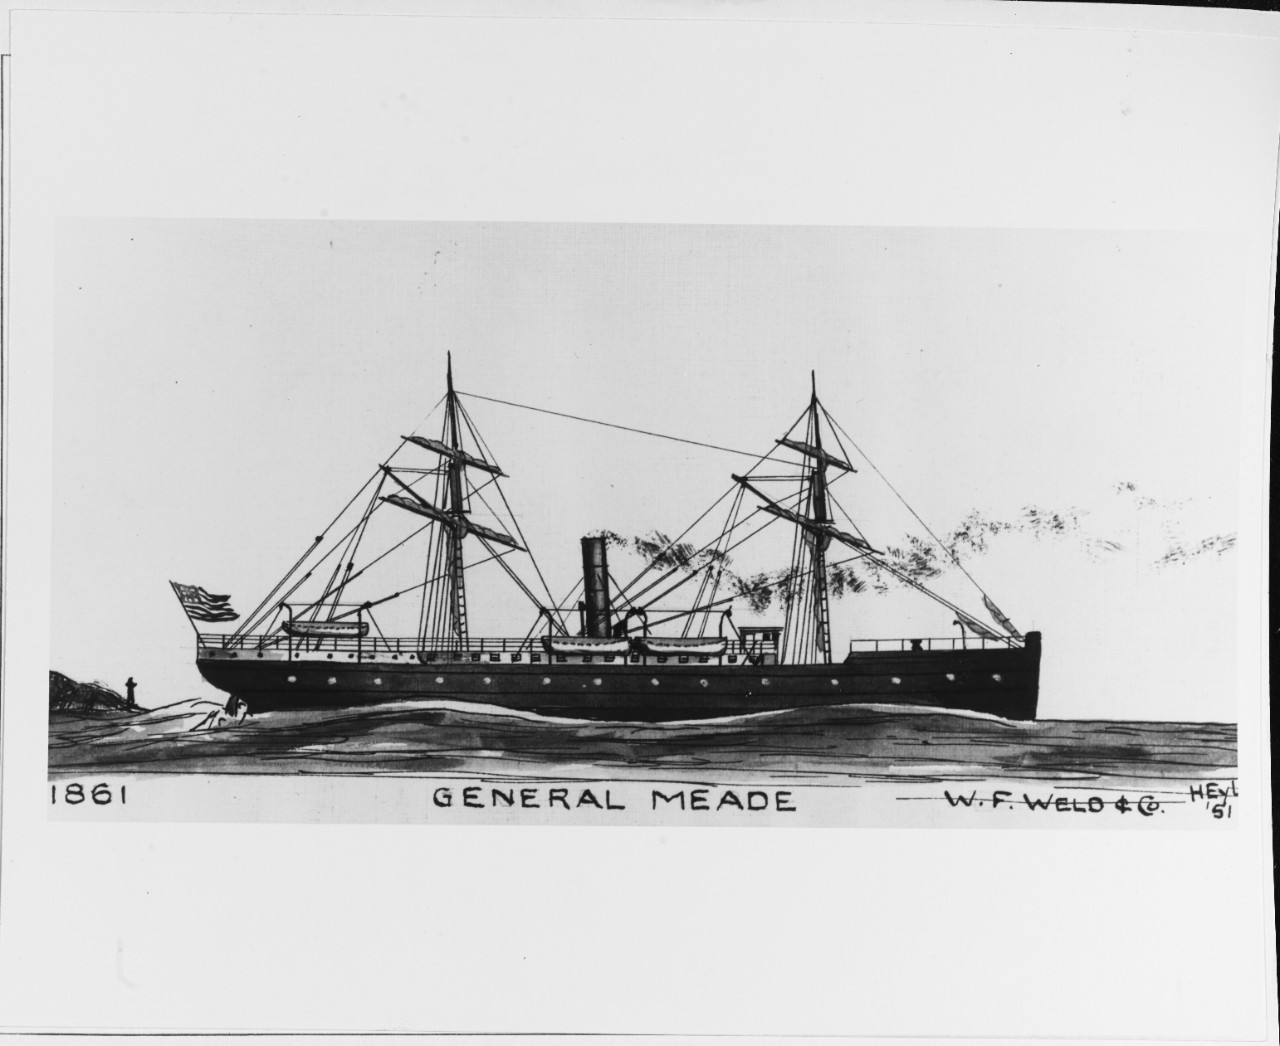 GENERAL MEADE (naval and merchant steamer, 1861-1882)